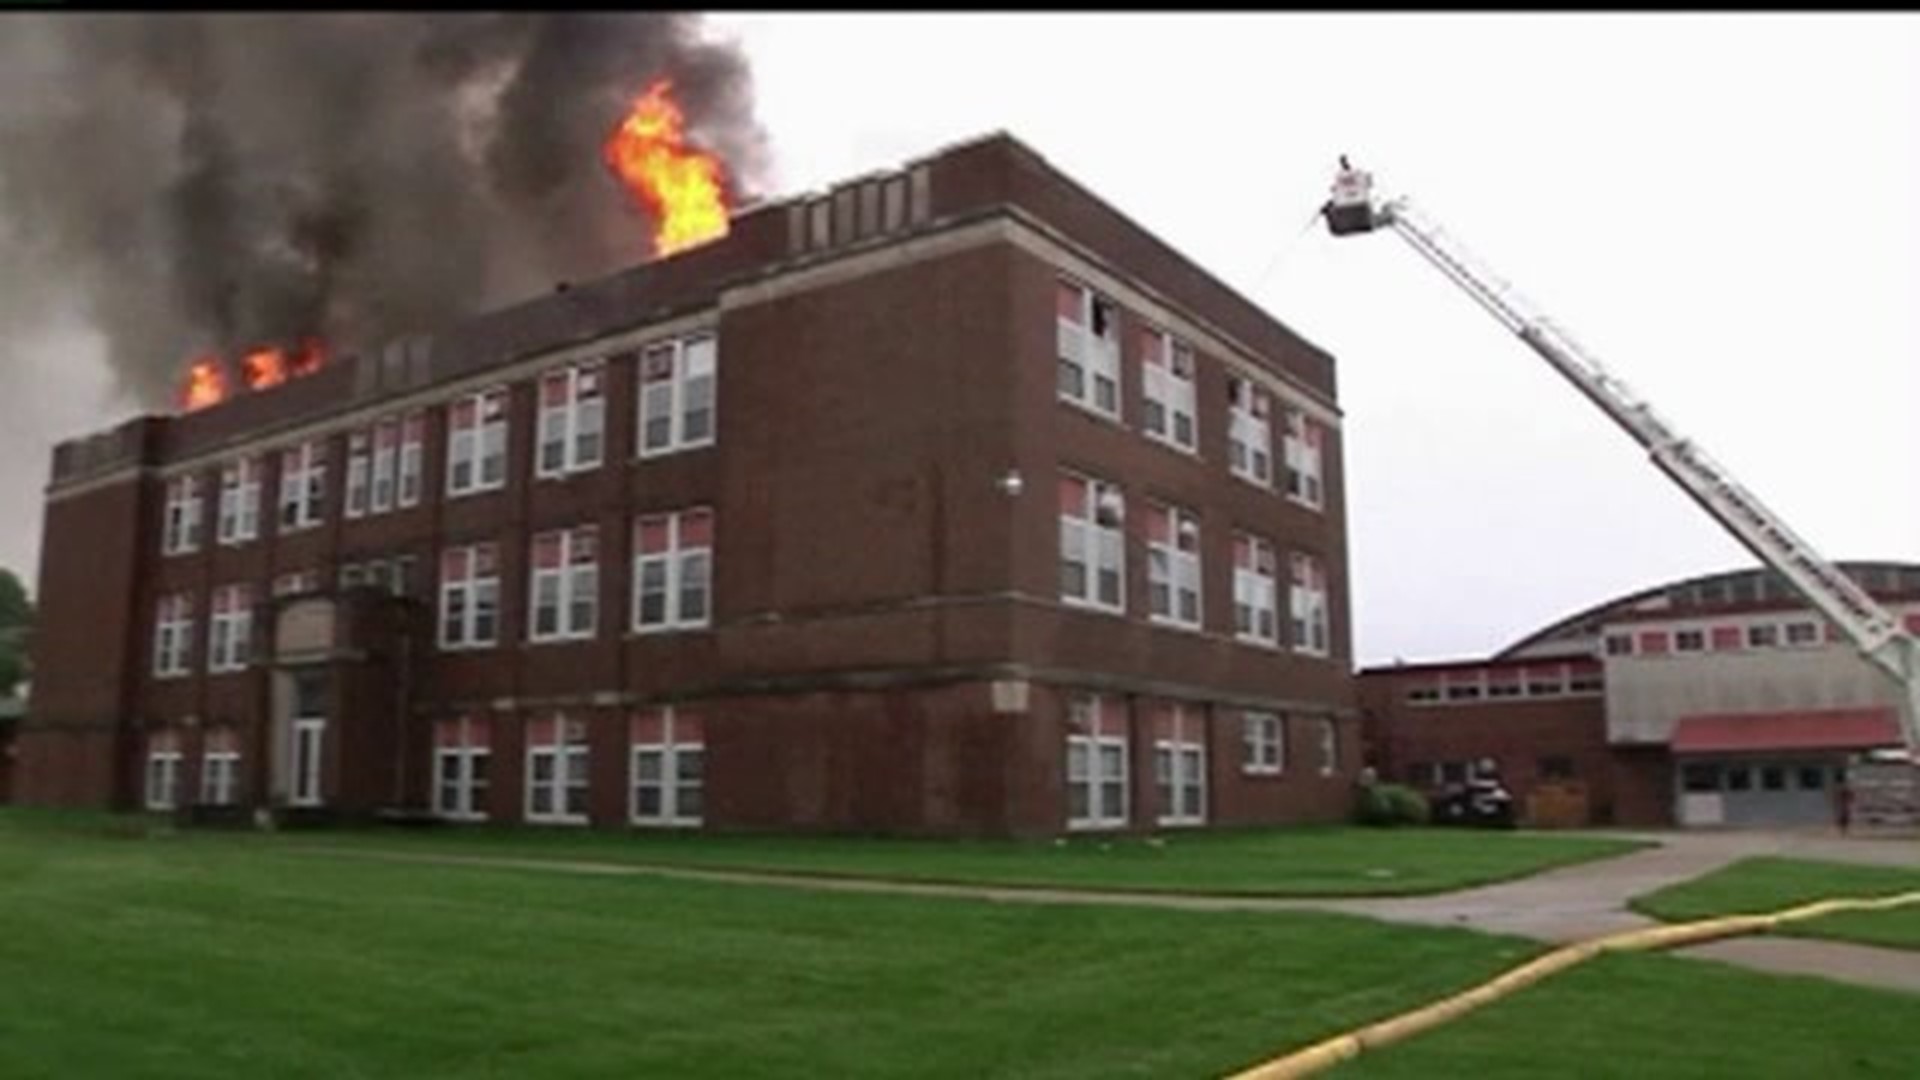 Flames shoot through roof of former school building